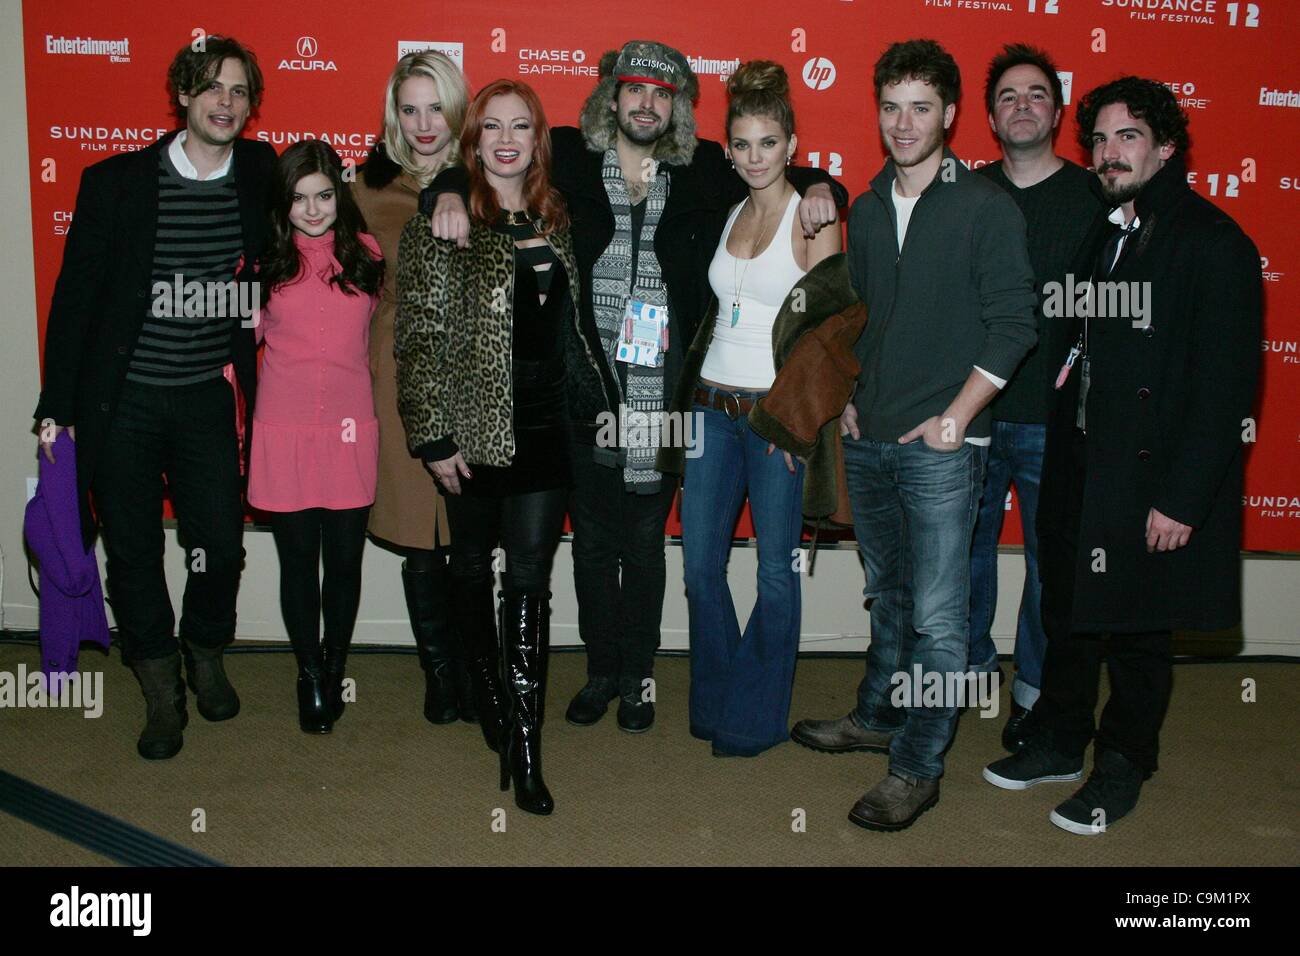 Matthew Gray Gubler, Ariel Winter, Molly McCook, Traci Lords, Richard Bates Jr., AnnaLynne McCord, Jeremy Sumpter, Roger Bart, Dylan Hale Lewis at arrivals for EXCISION Premiere at the 2012 Sundance Film Festival, The Egyptian Theatre, Park City, UT January 21, 2012. Photo By: James Atoa/Everett Col Stock Photo